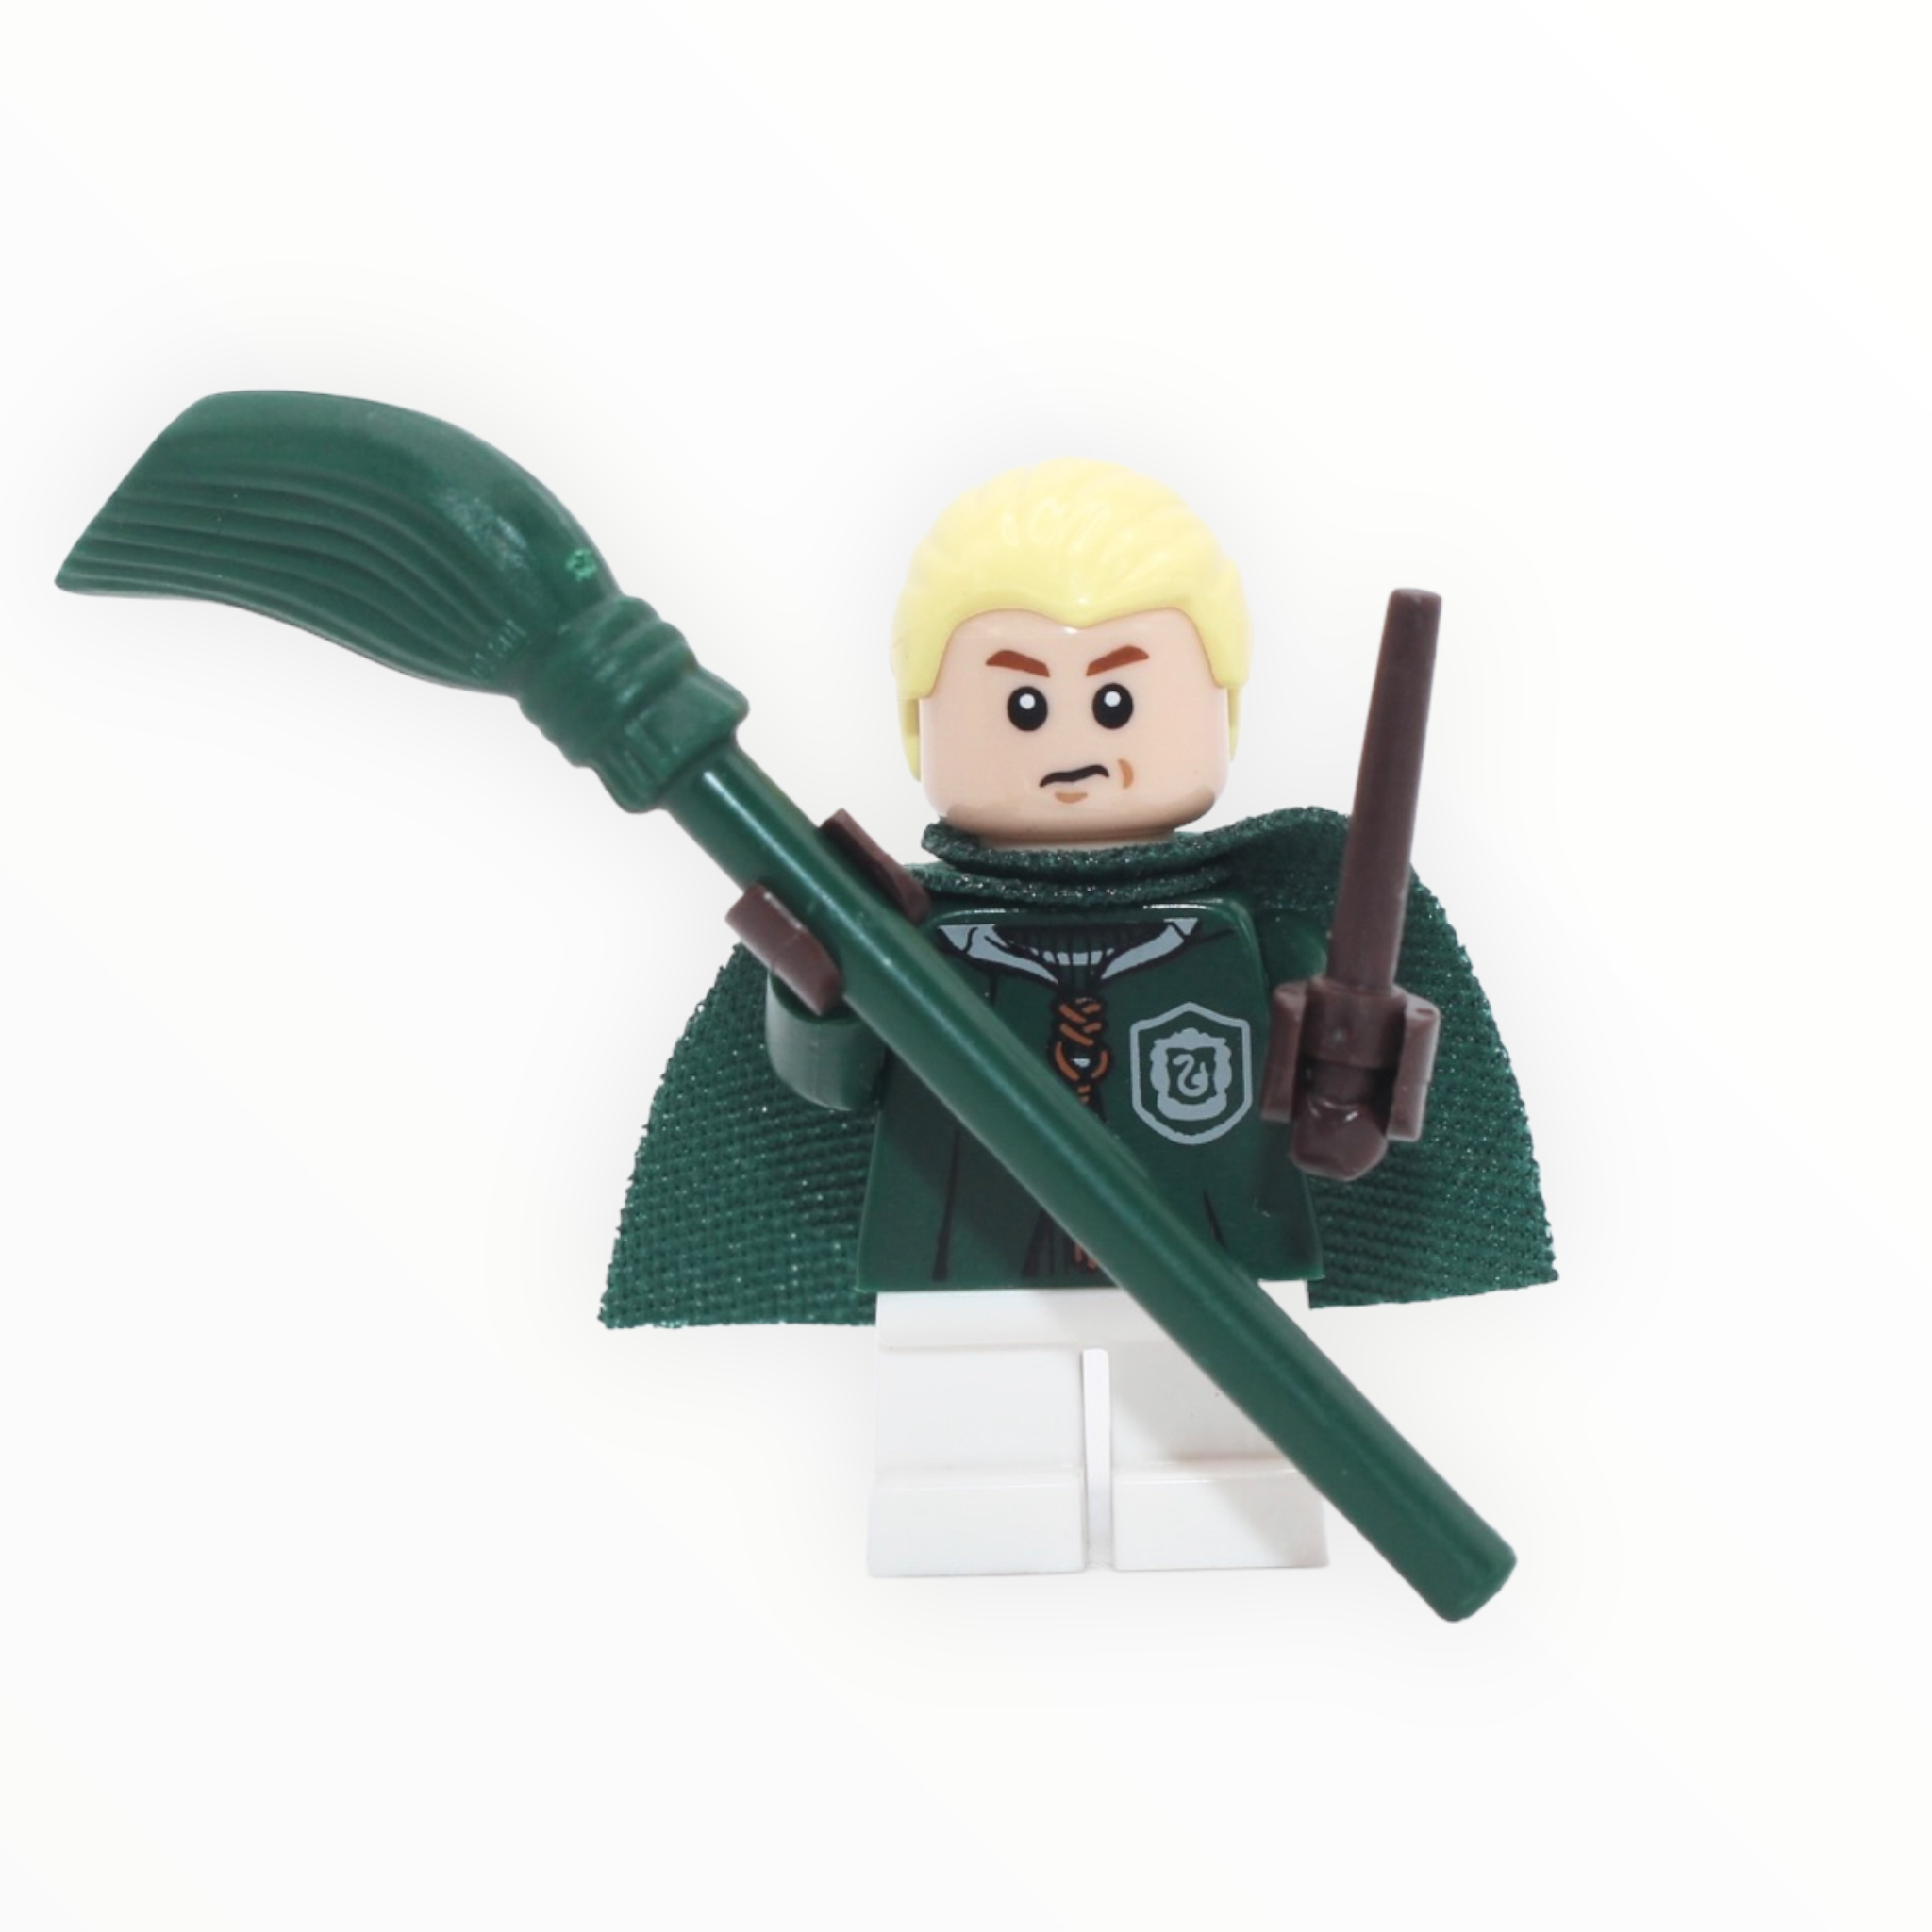 Harry Potter Series: Draco Malfoy in Quidditch Robes